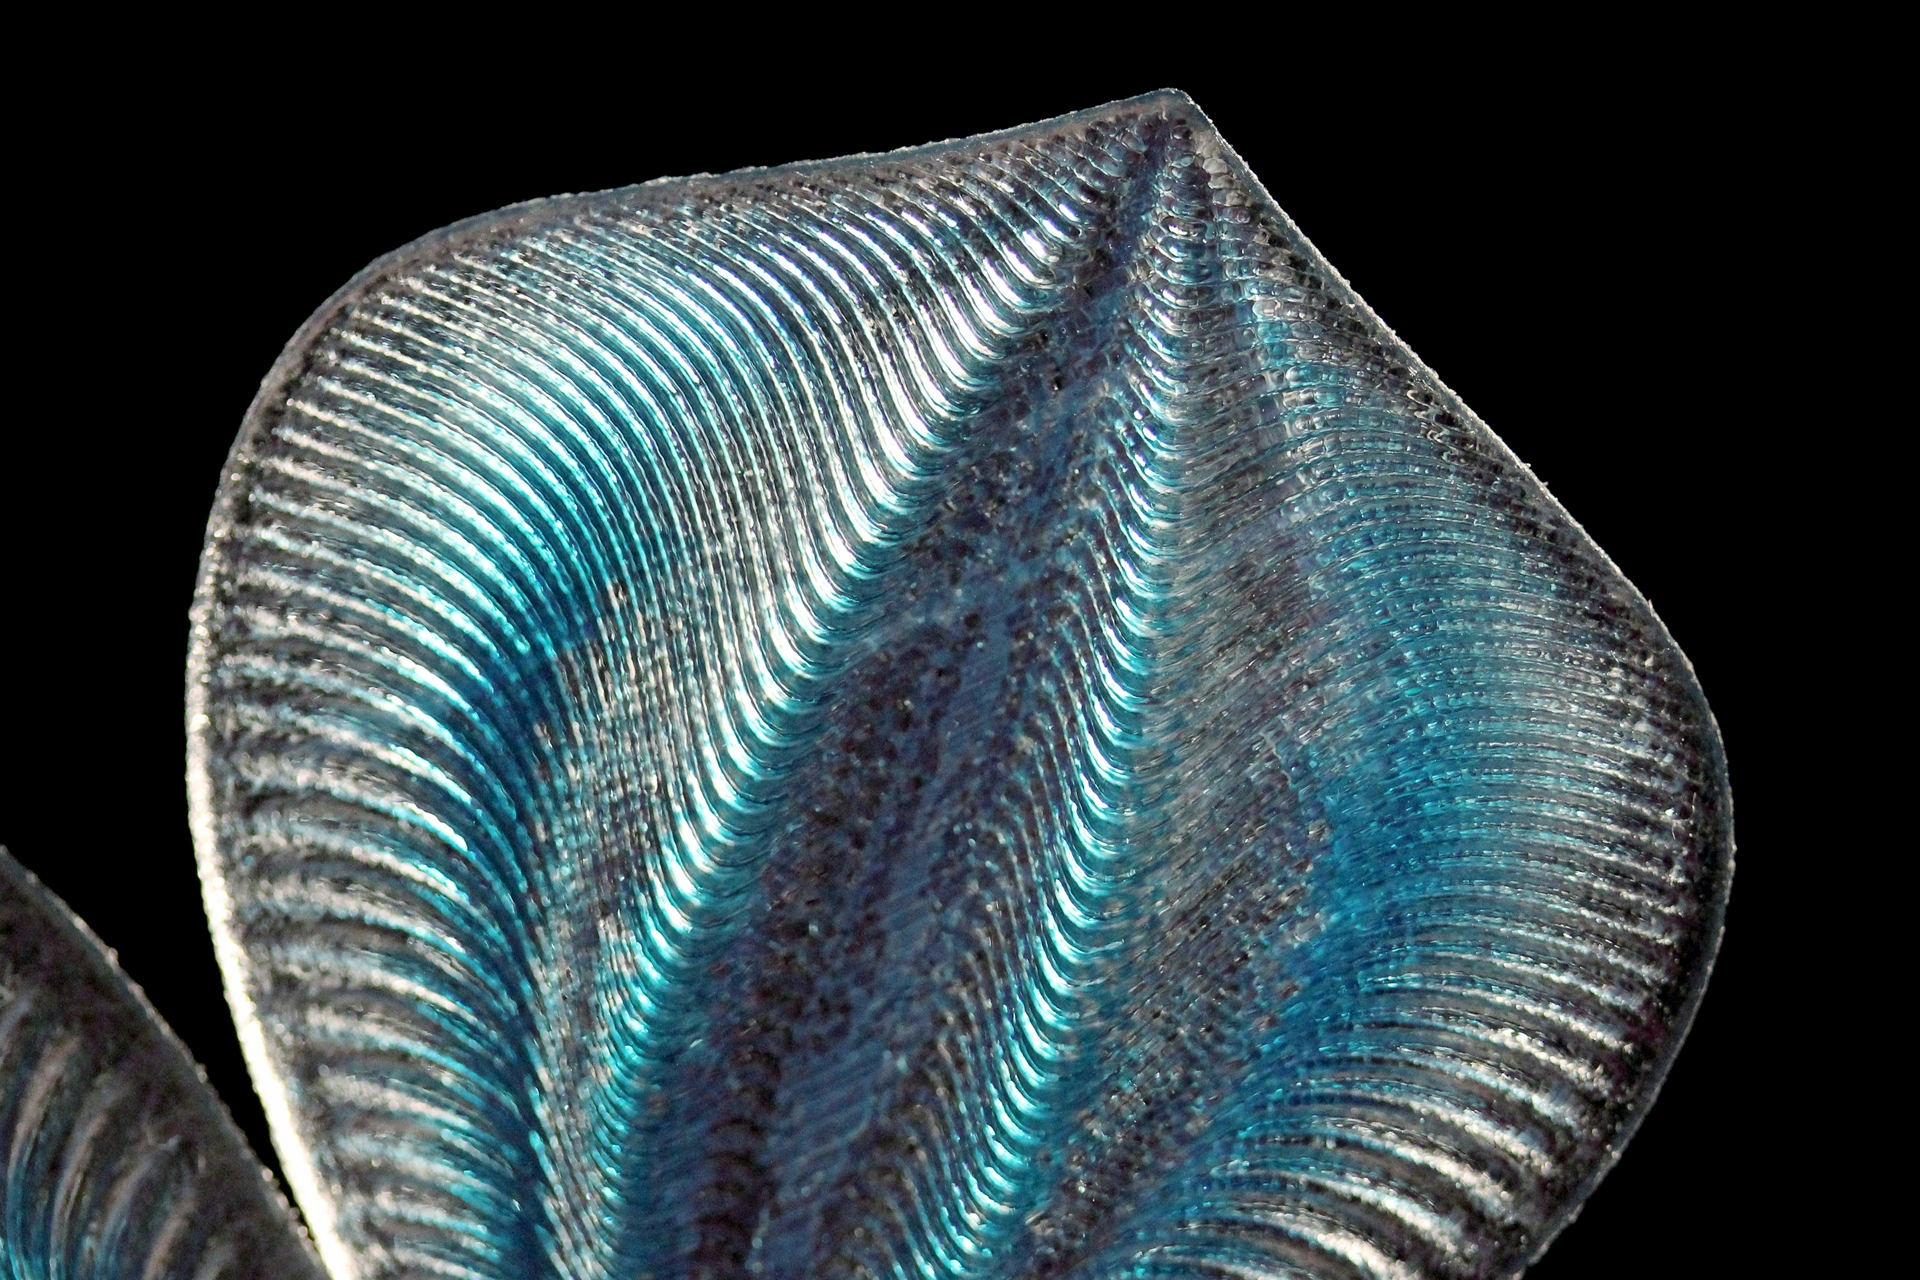 Close-up of blue 3D printed petal with curved vein patterning.
